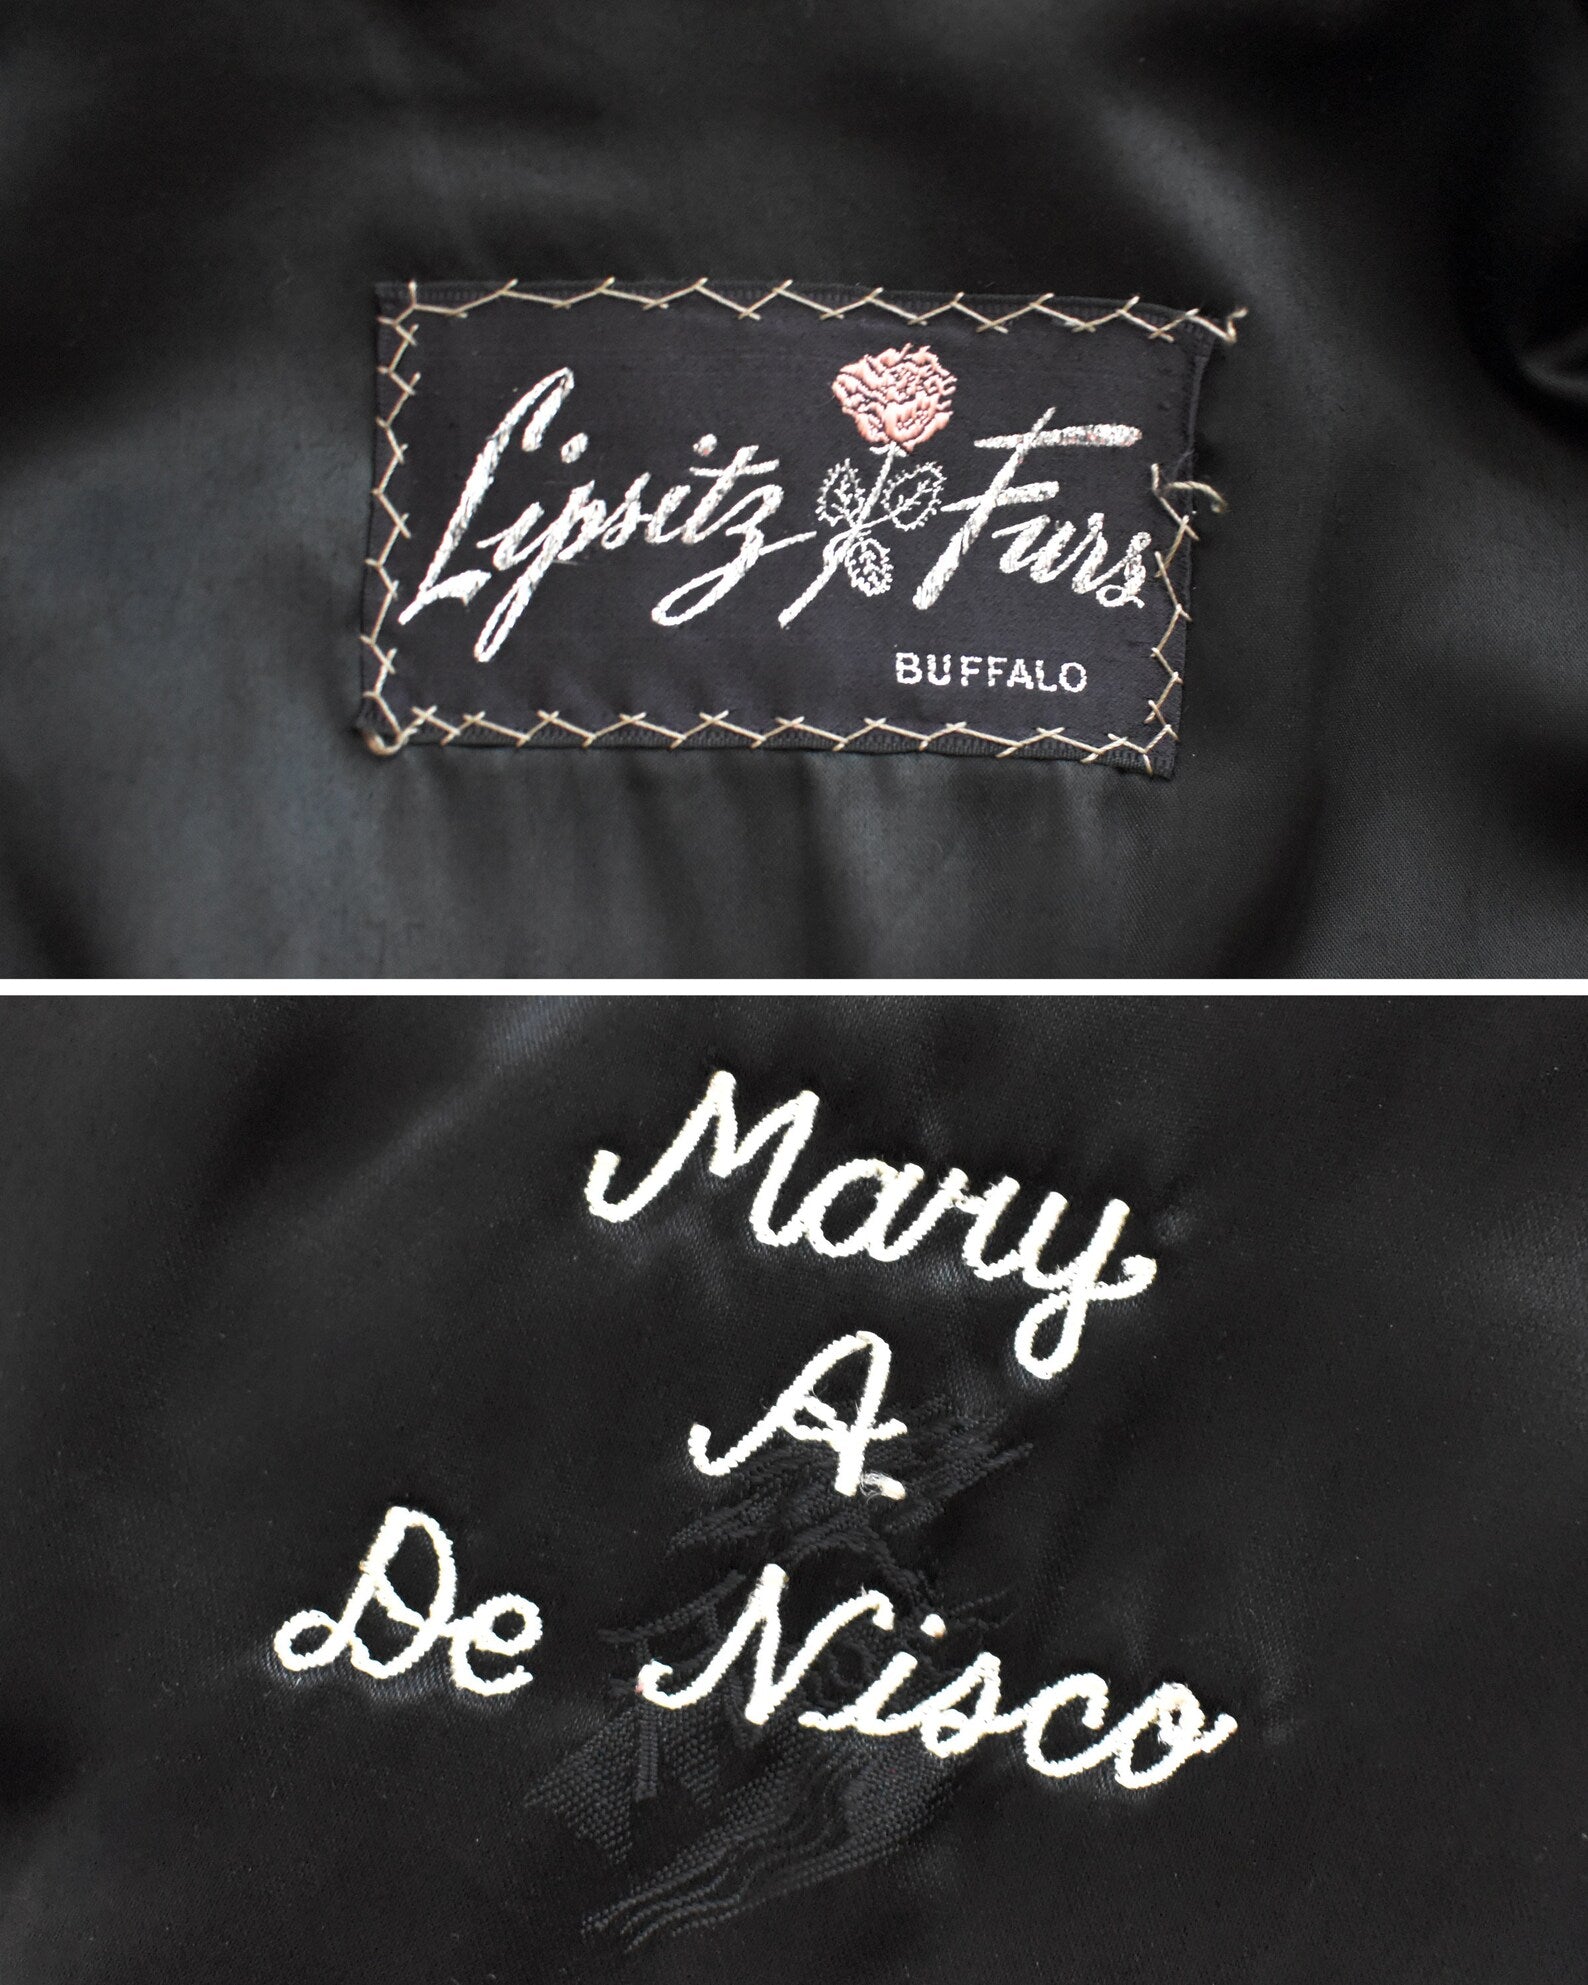 Top photo features the tag which says Lipsitz Furs Buffalo with an embroidered pink rose and the bottom photo has Mary A De Nisco in white embroidery